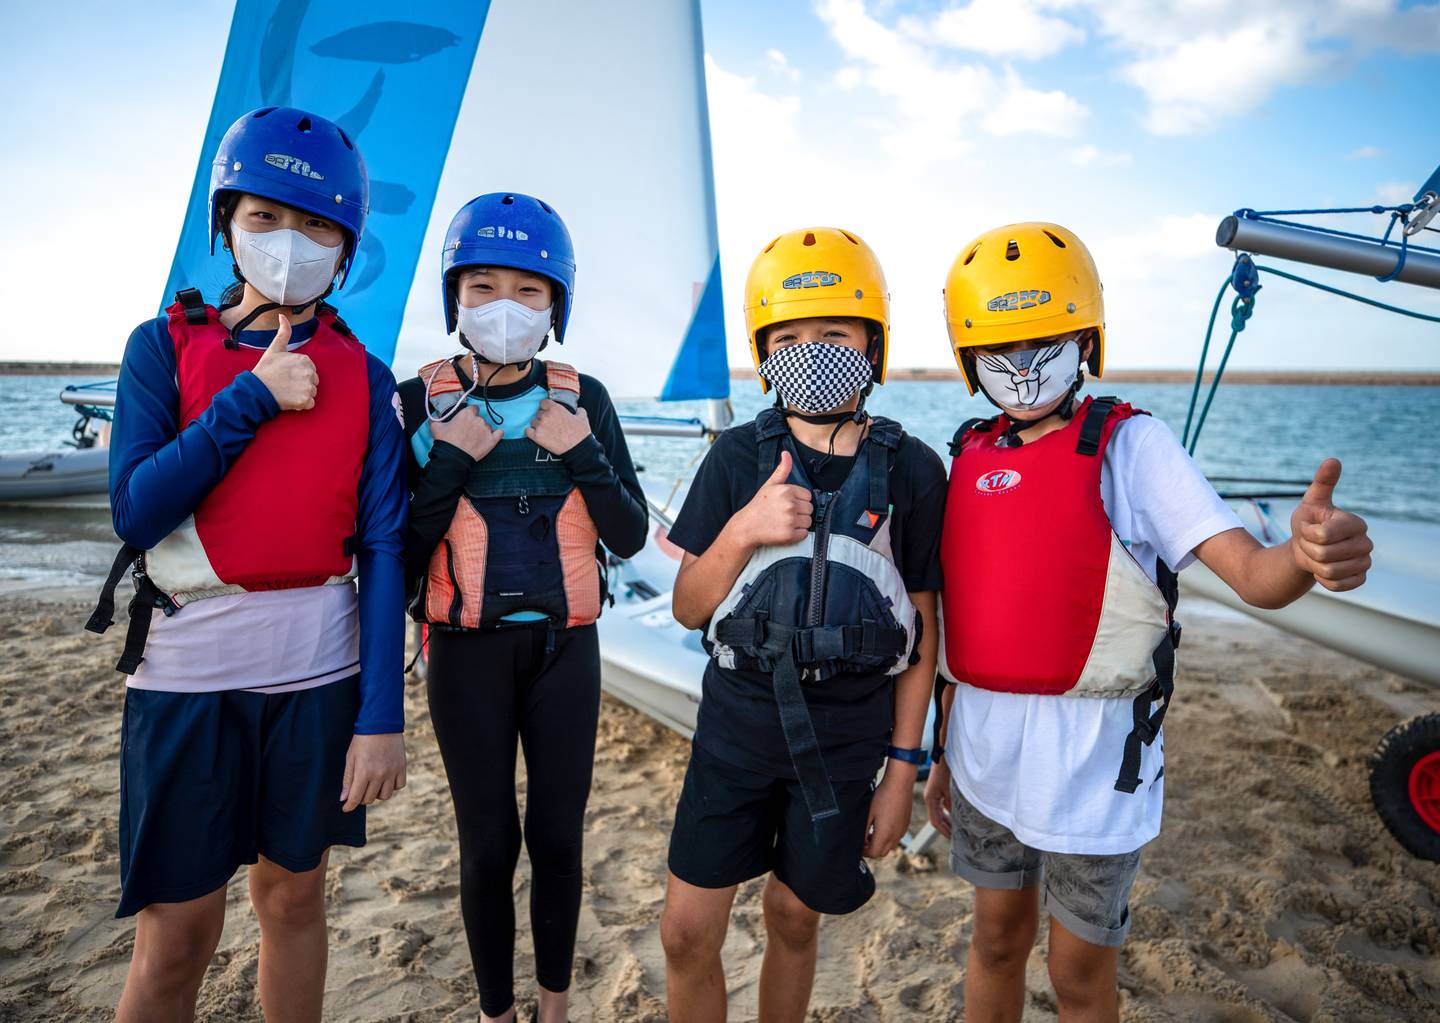 Pupils at Amity International School get ready for their sailing lesson. Victor Besa / The National